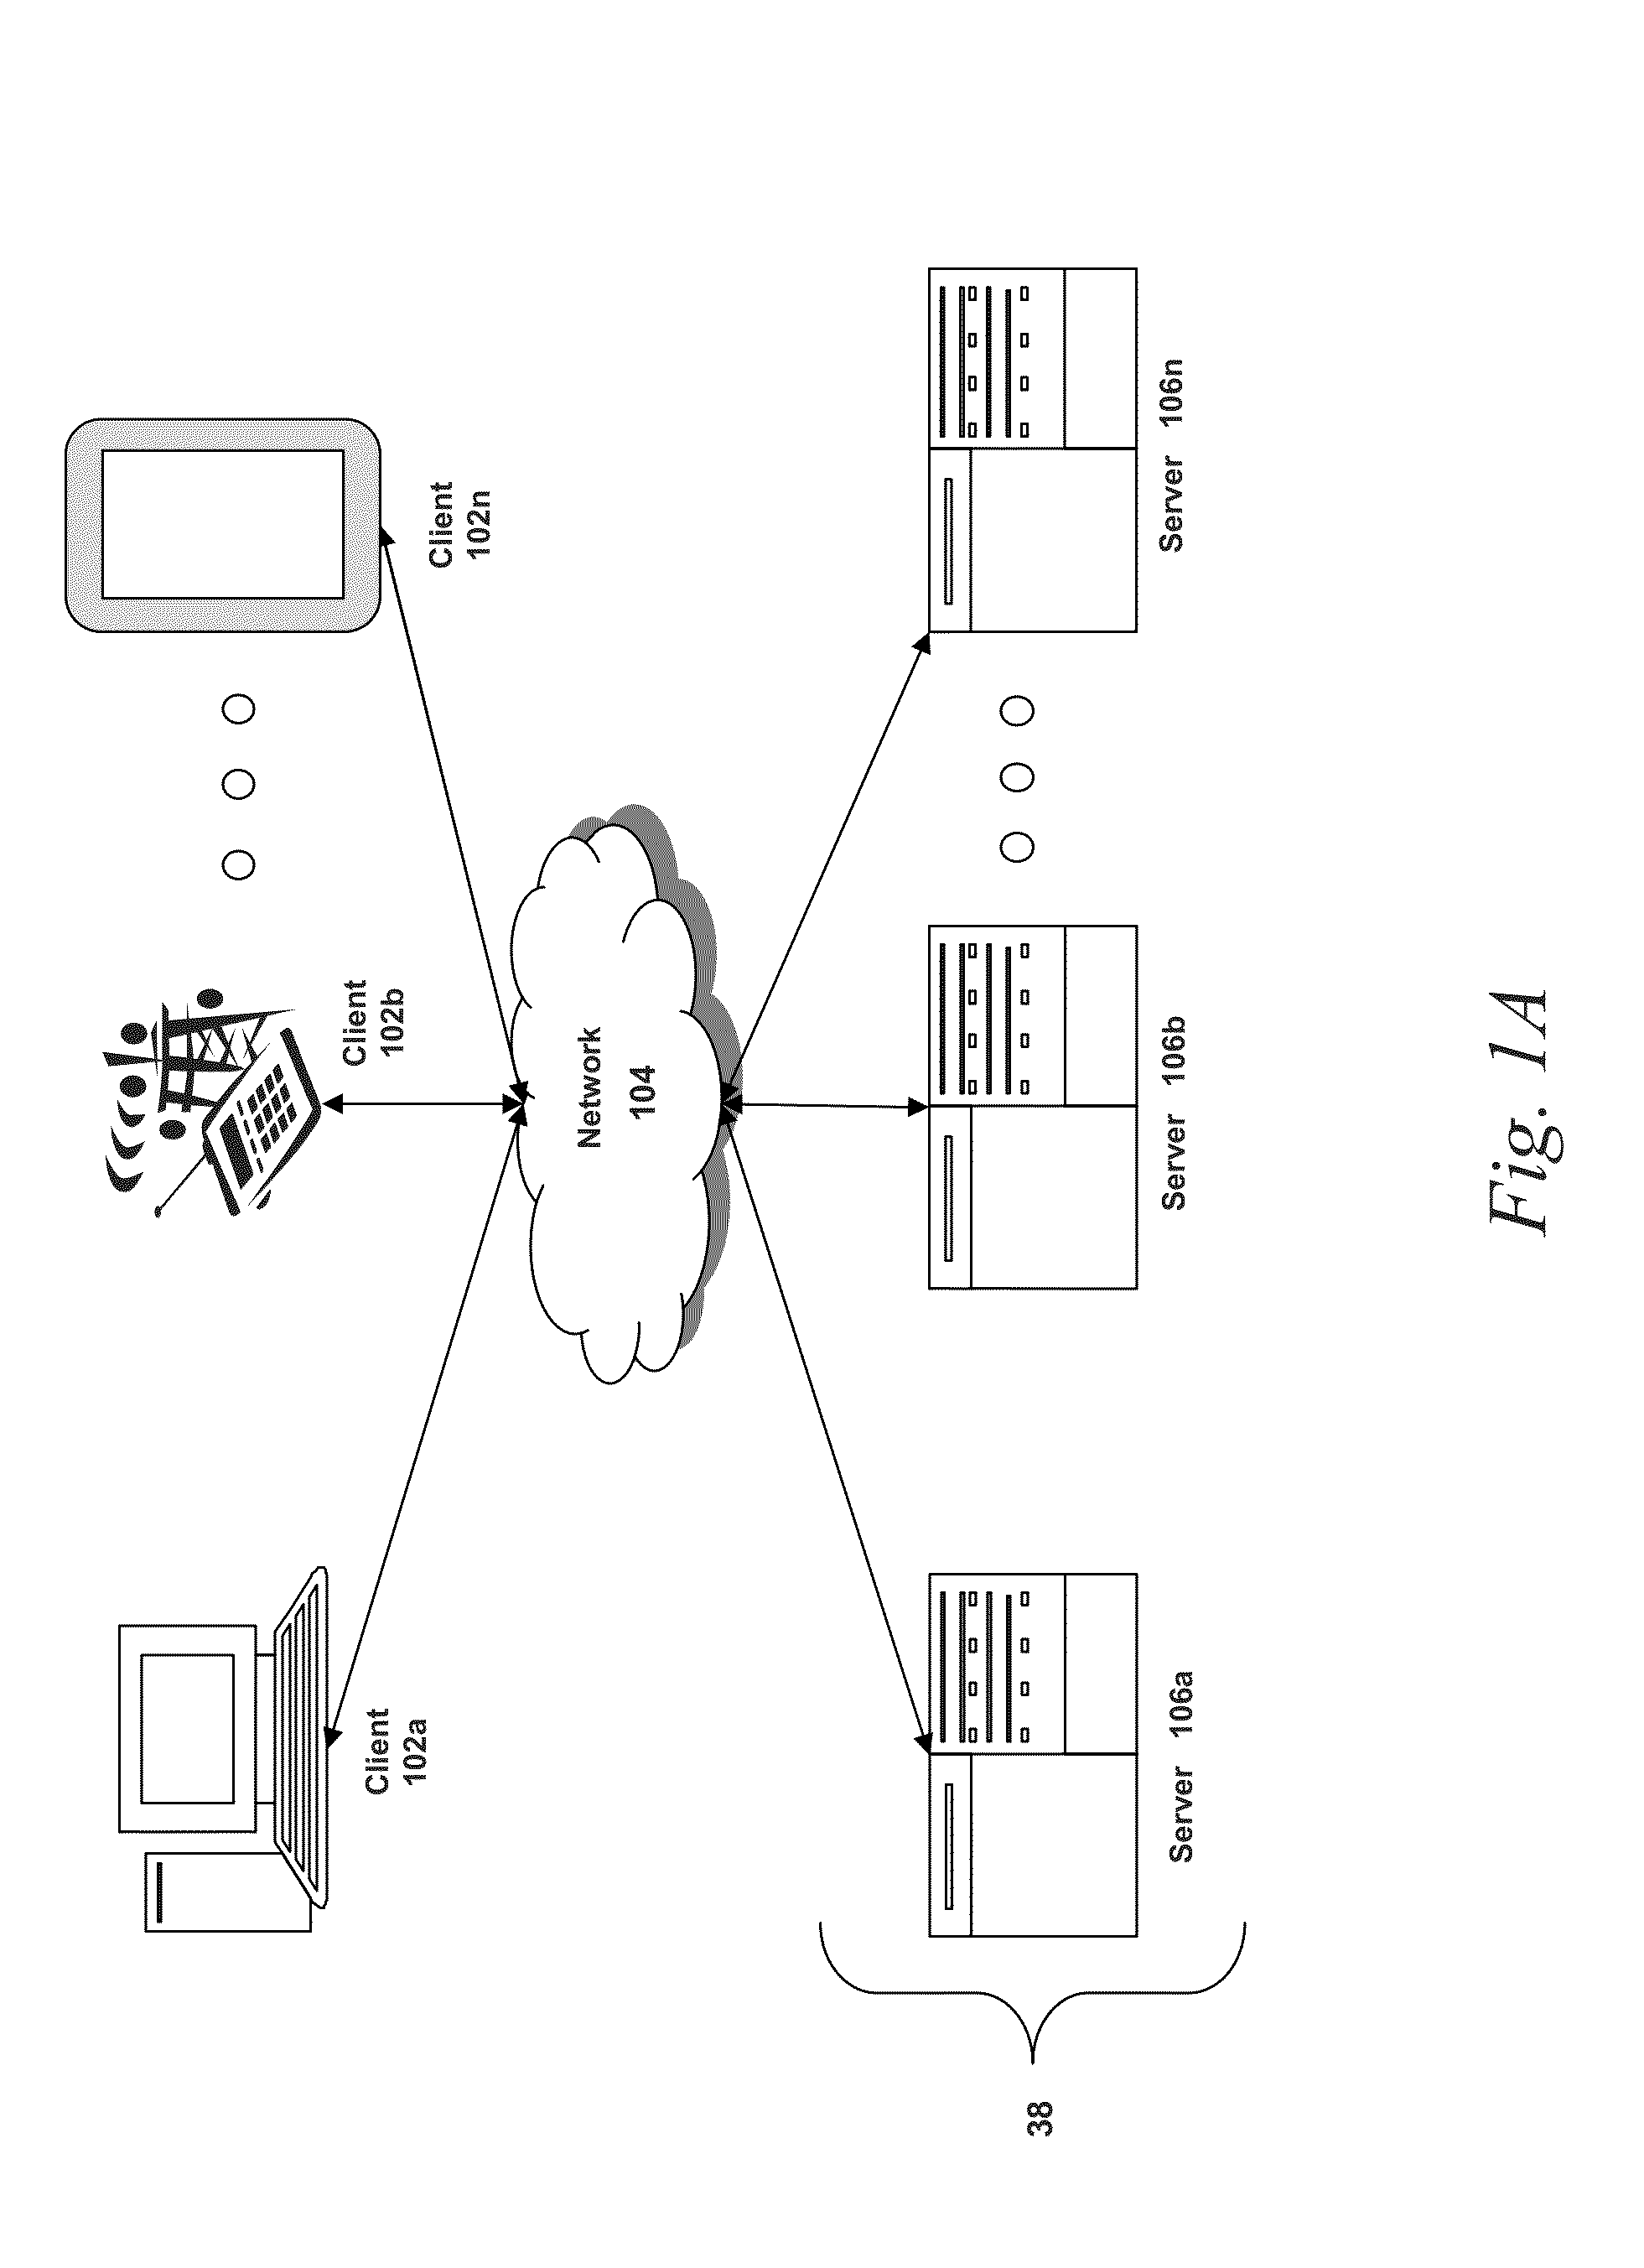 Systems and methods for tracking a set of experiments